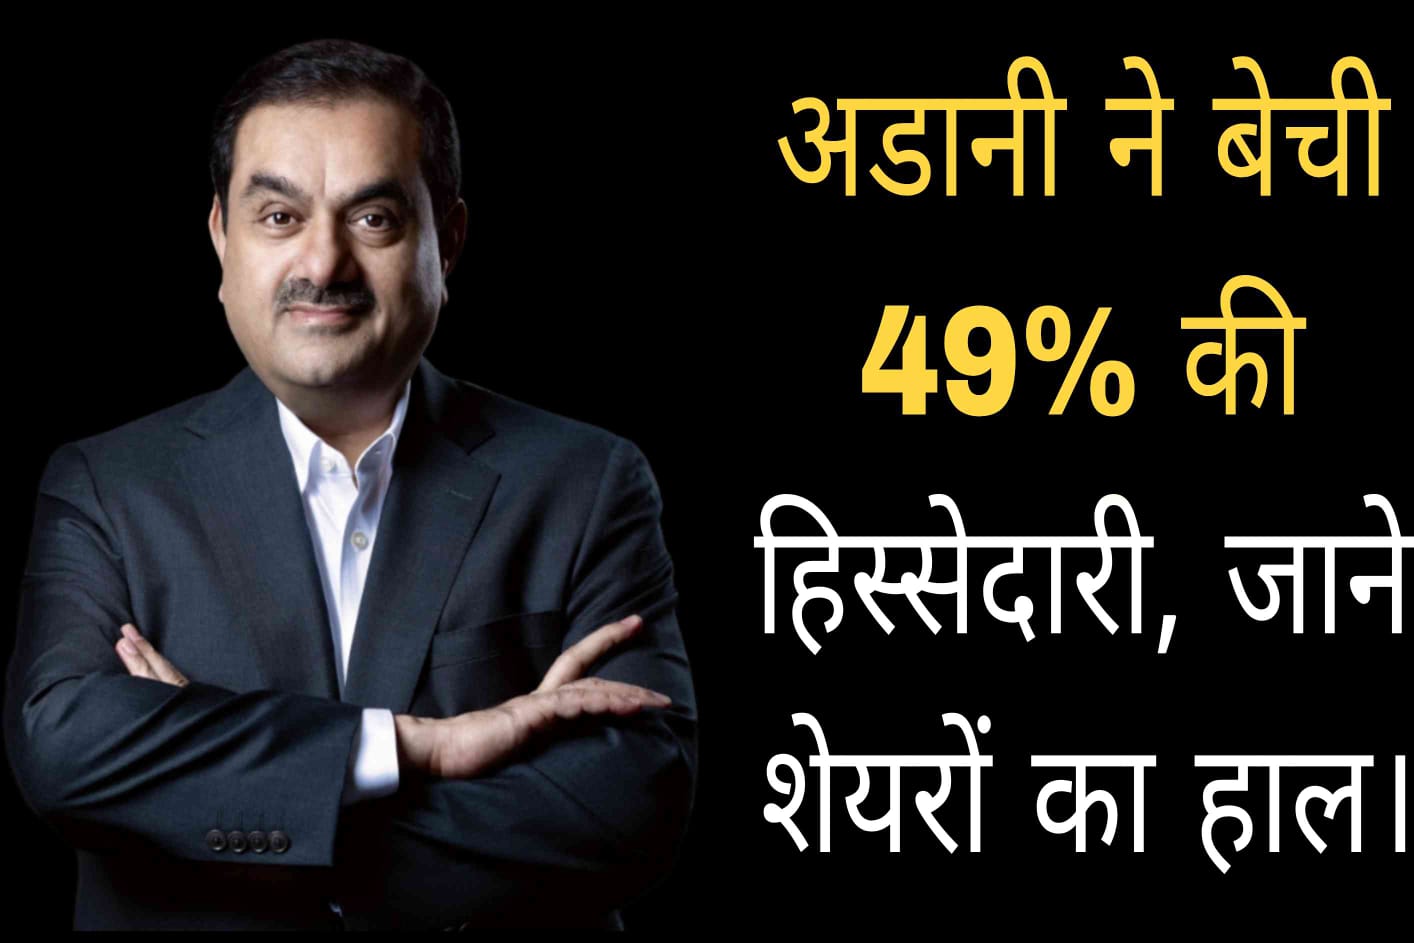 Adani sold 49% stake, know the status of shares.